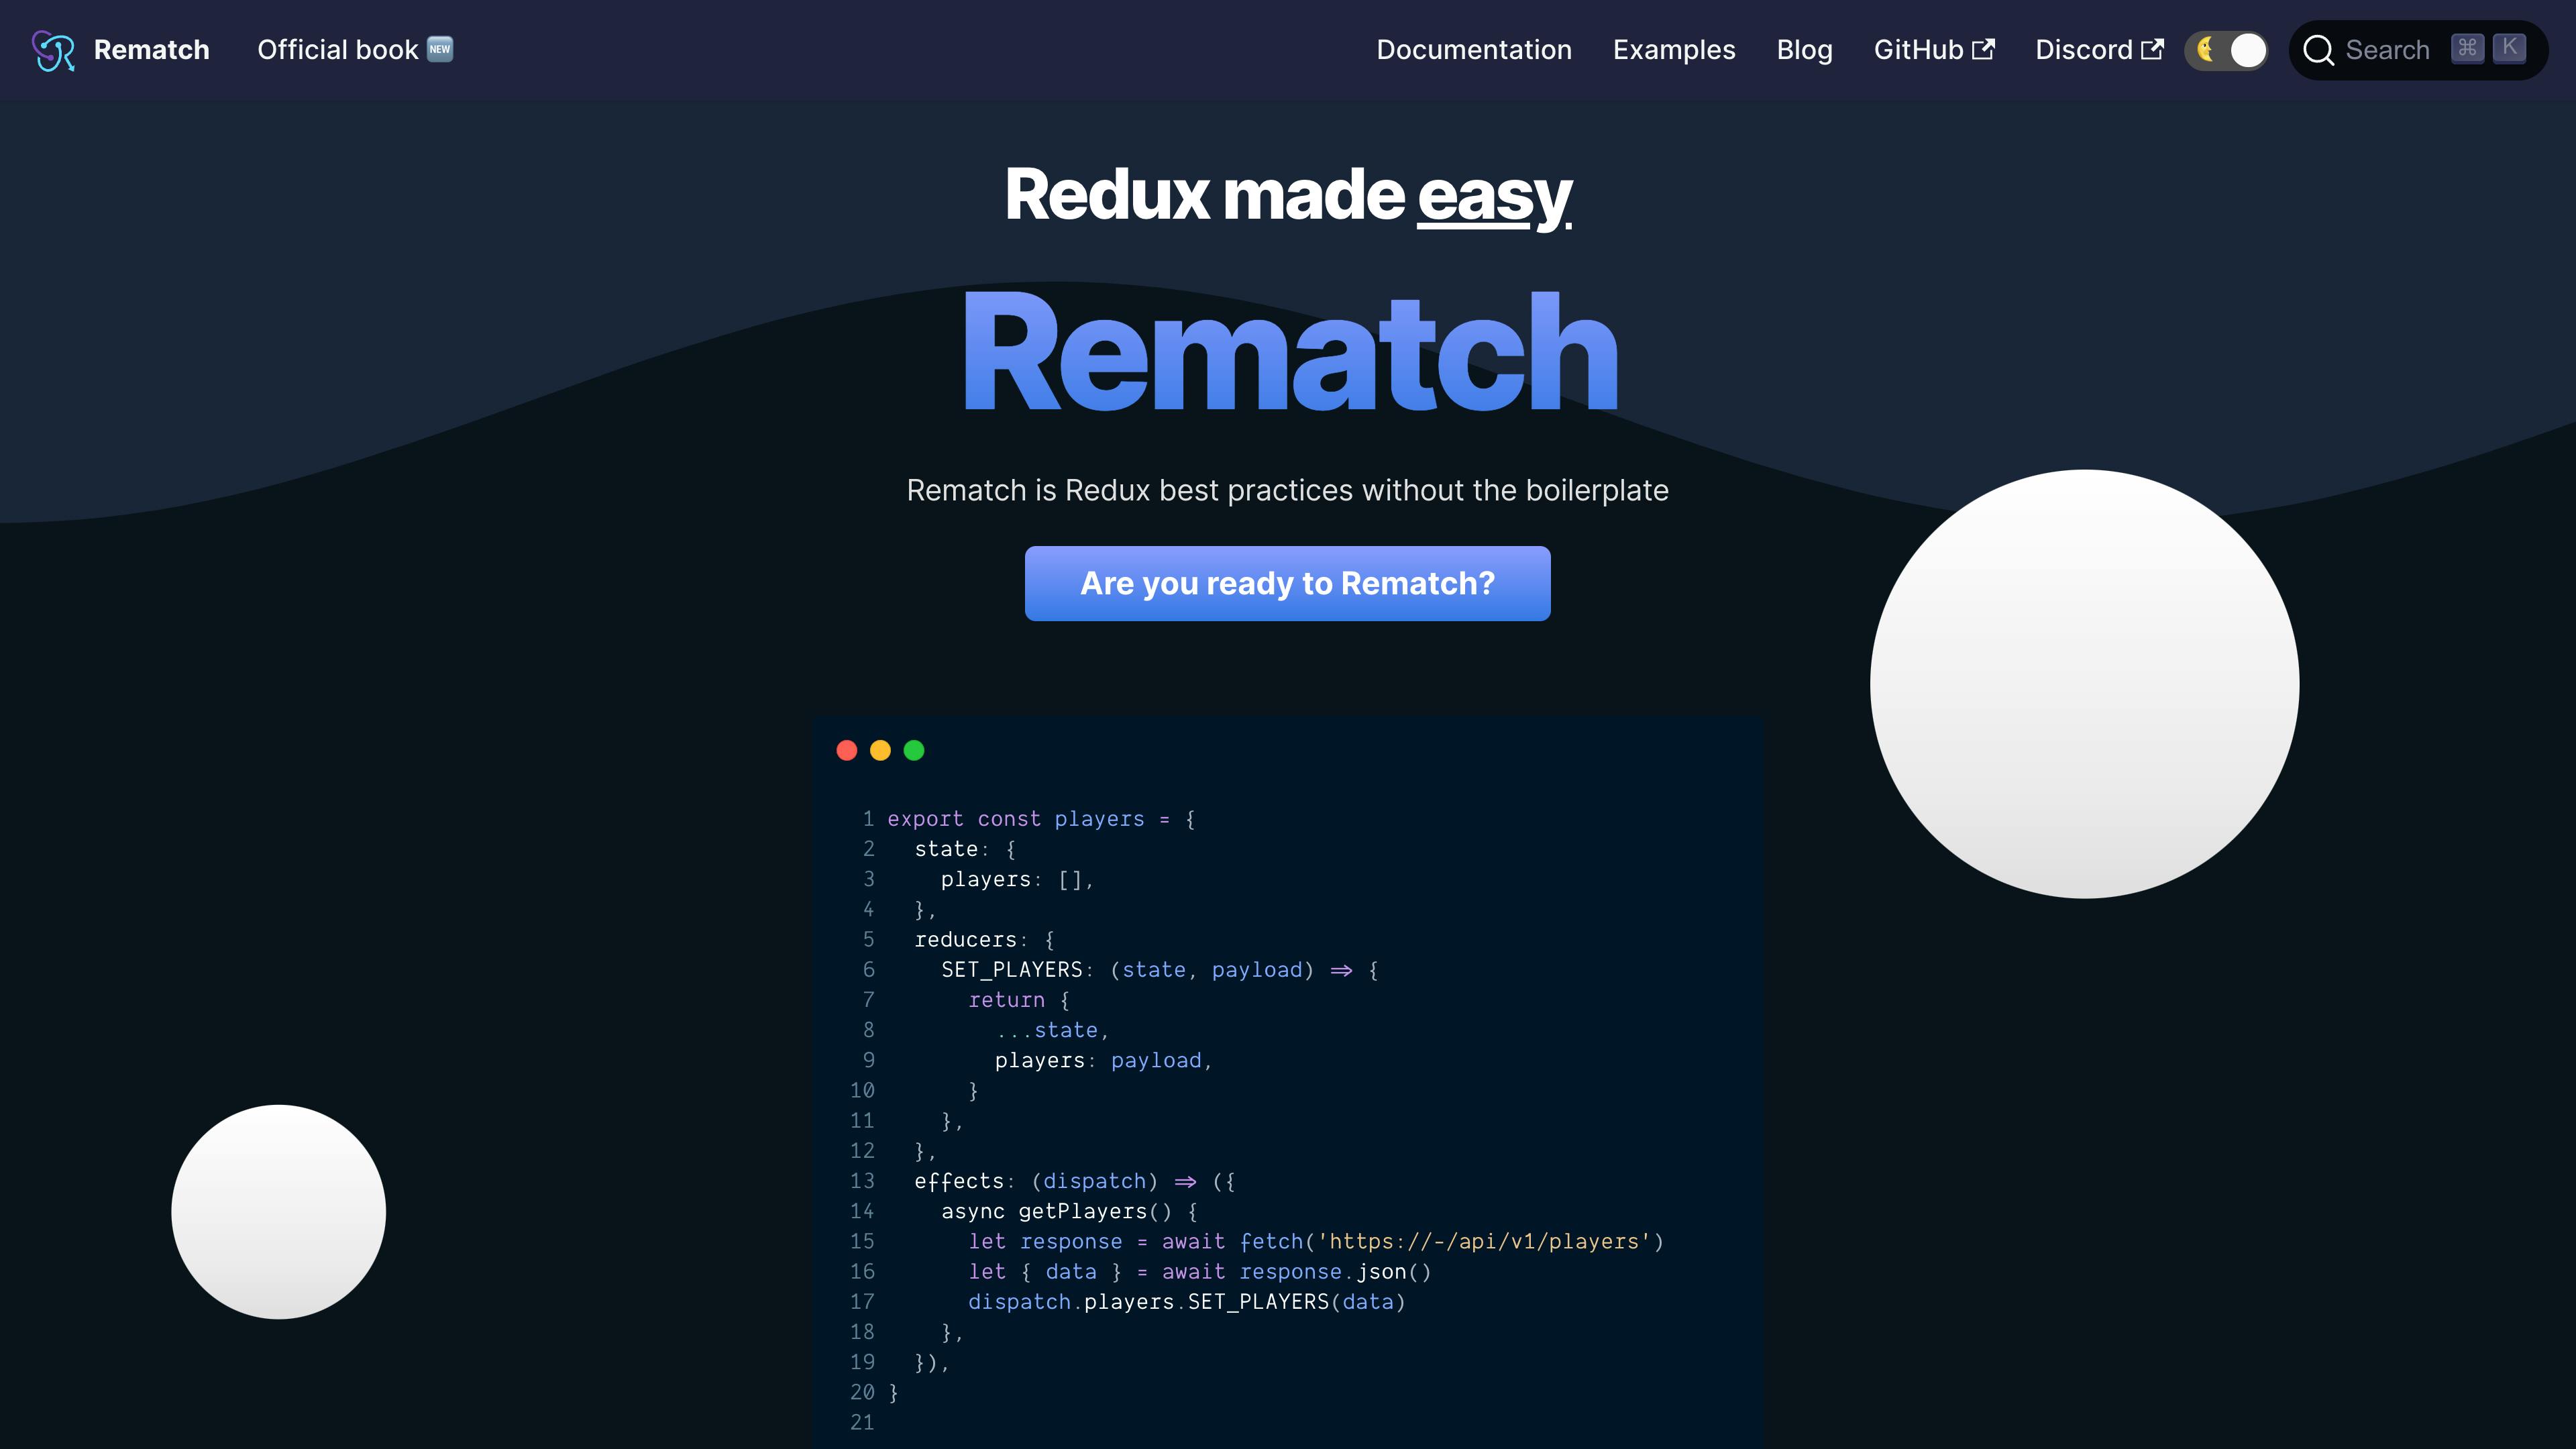 Rematch landing page